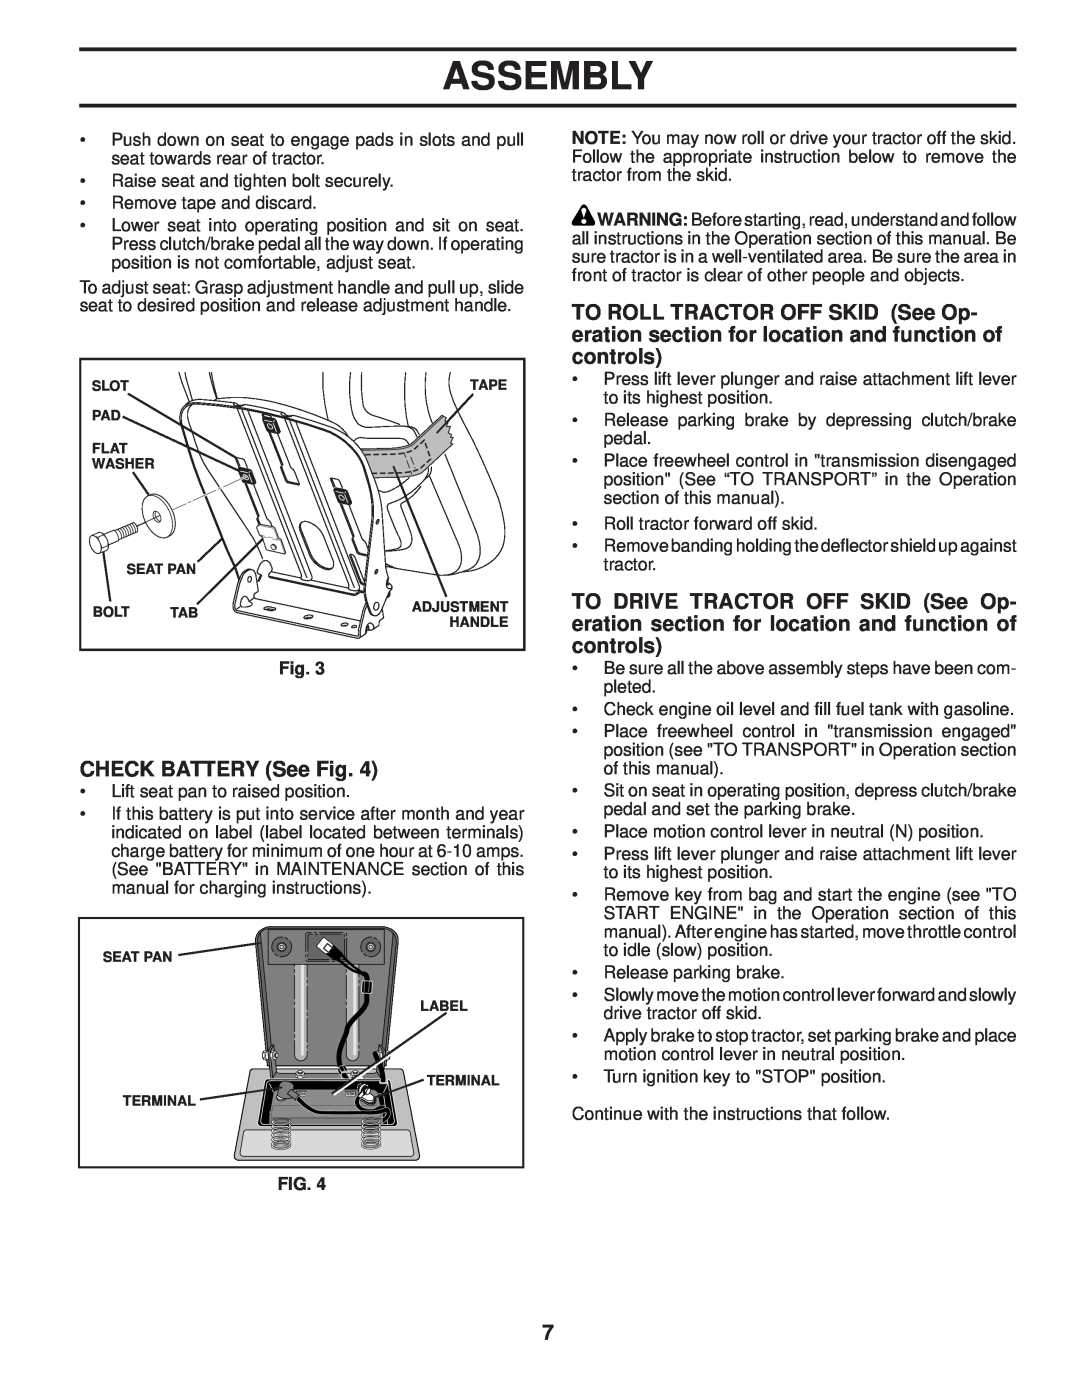 Poulan 96042004201, 411274 manual CHECK BATTERY See Fig, Assembly 